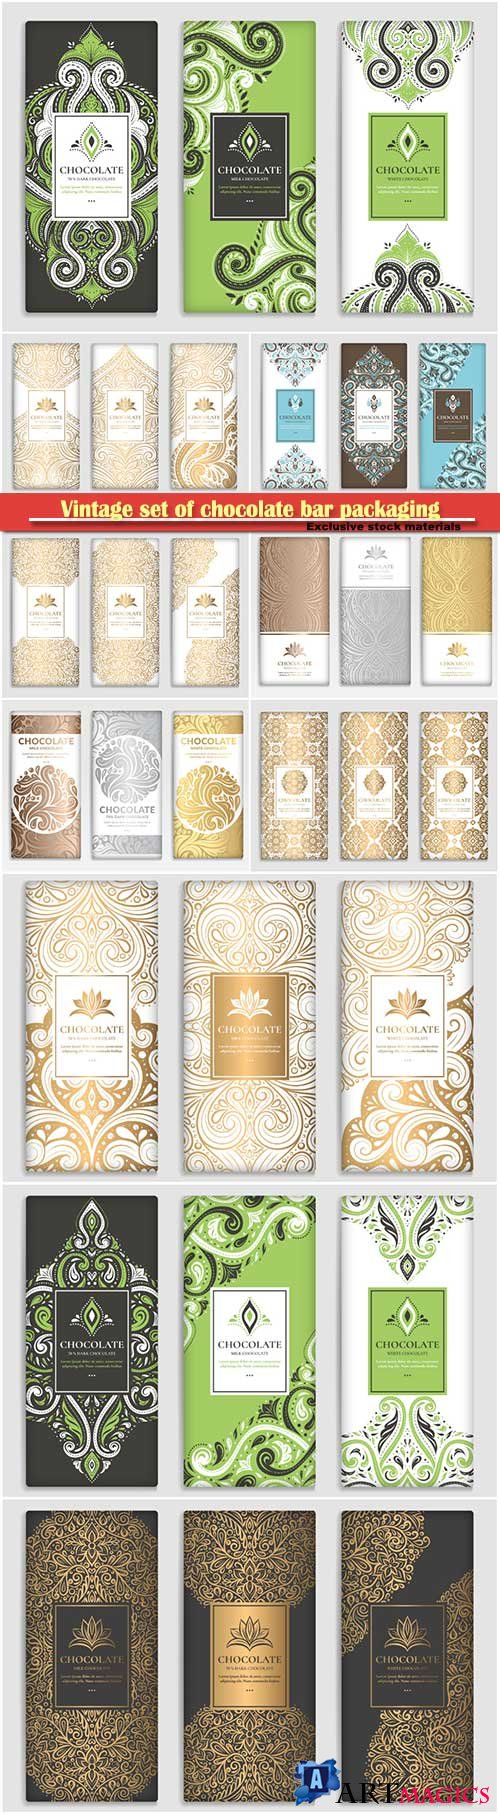 Vintage set of chocolate bar packaging design, vector luxury template with ornament elements